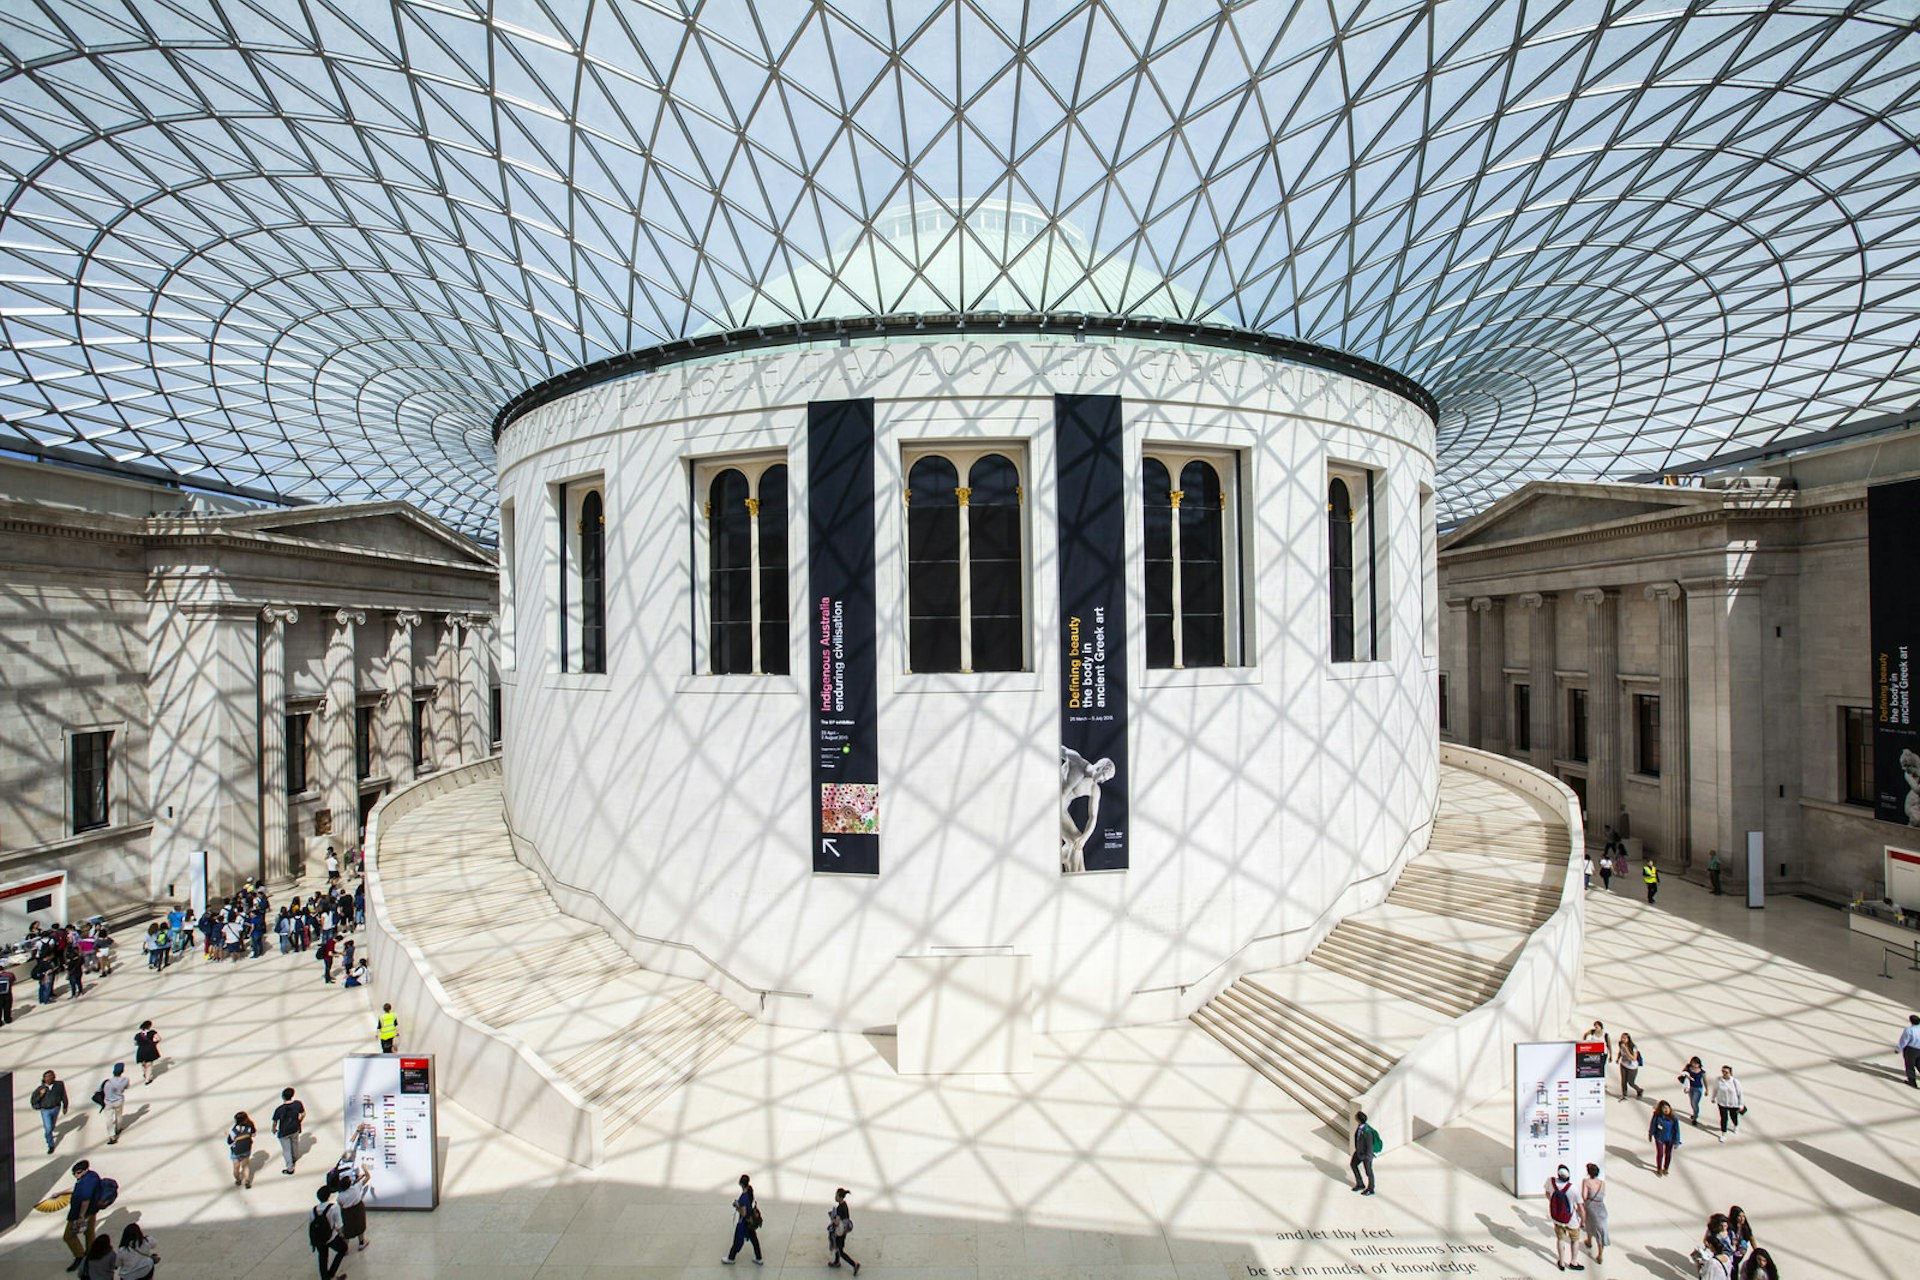 The magnificent Great Hall of the British Museum © Chris Dorney / Shutterstock 